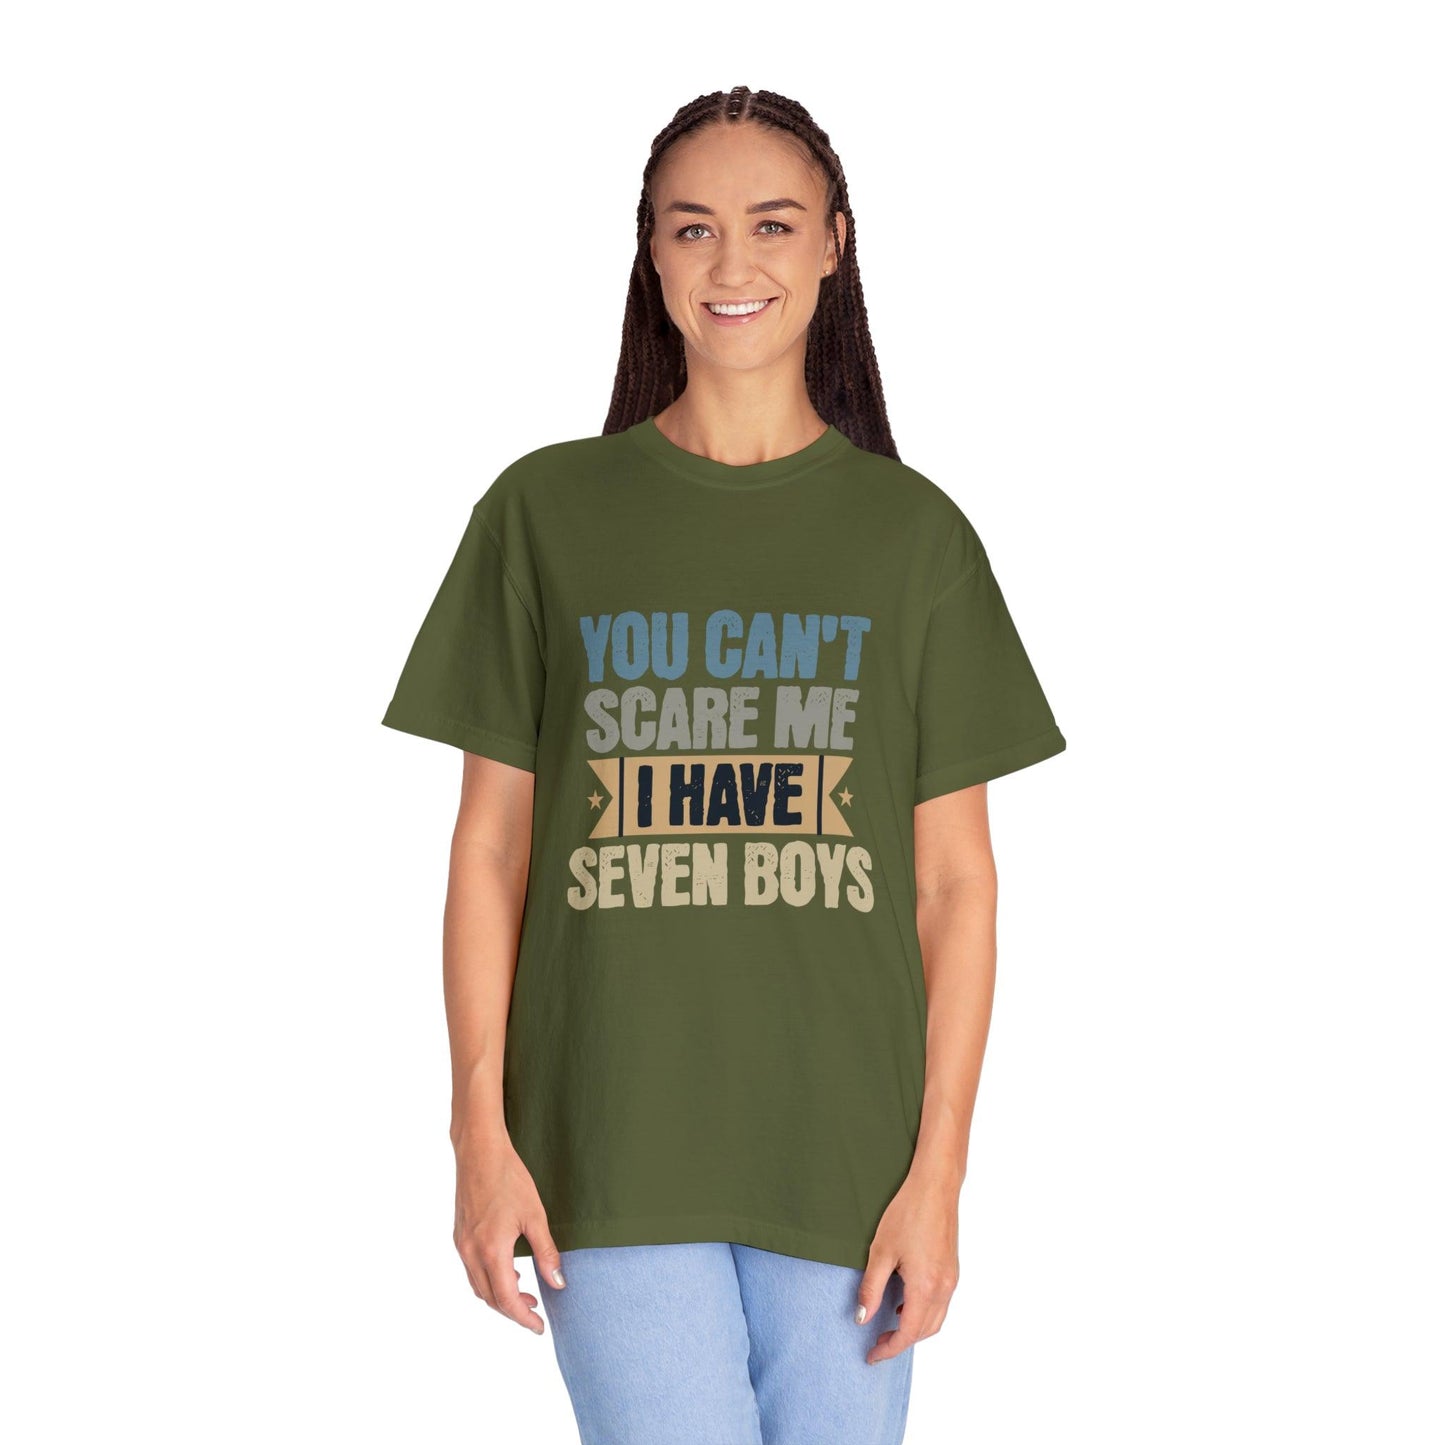 You Can't Scare Me, I Have 7 Boys: Proud Mama T-Shirt - Pandaize